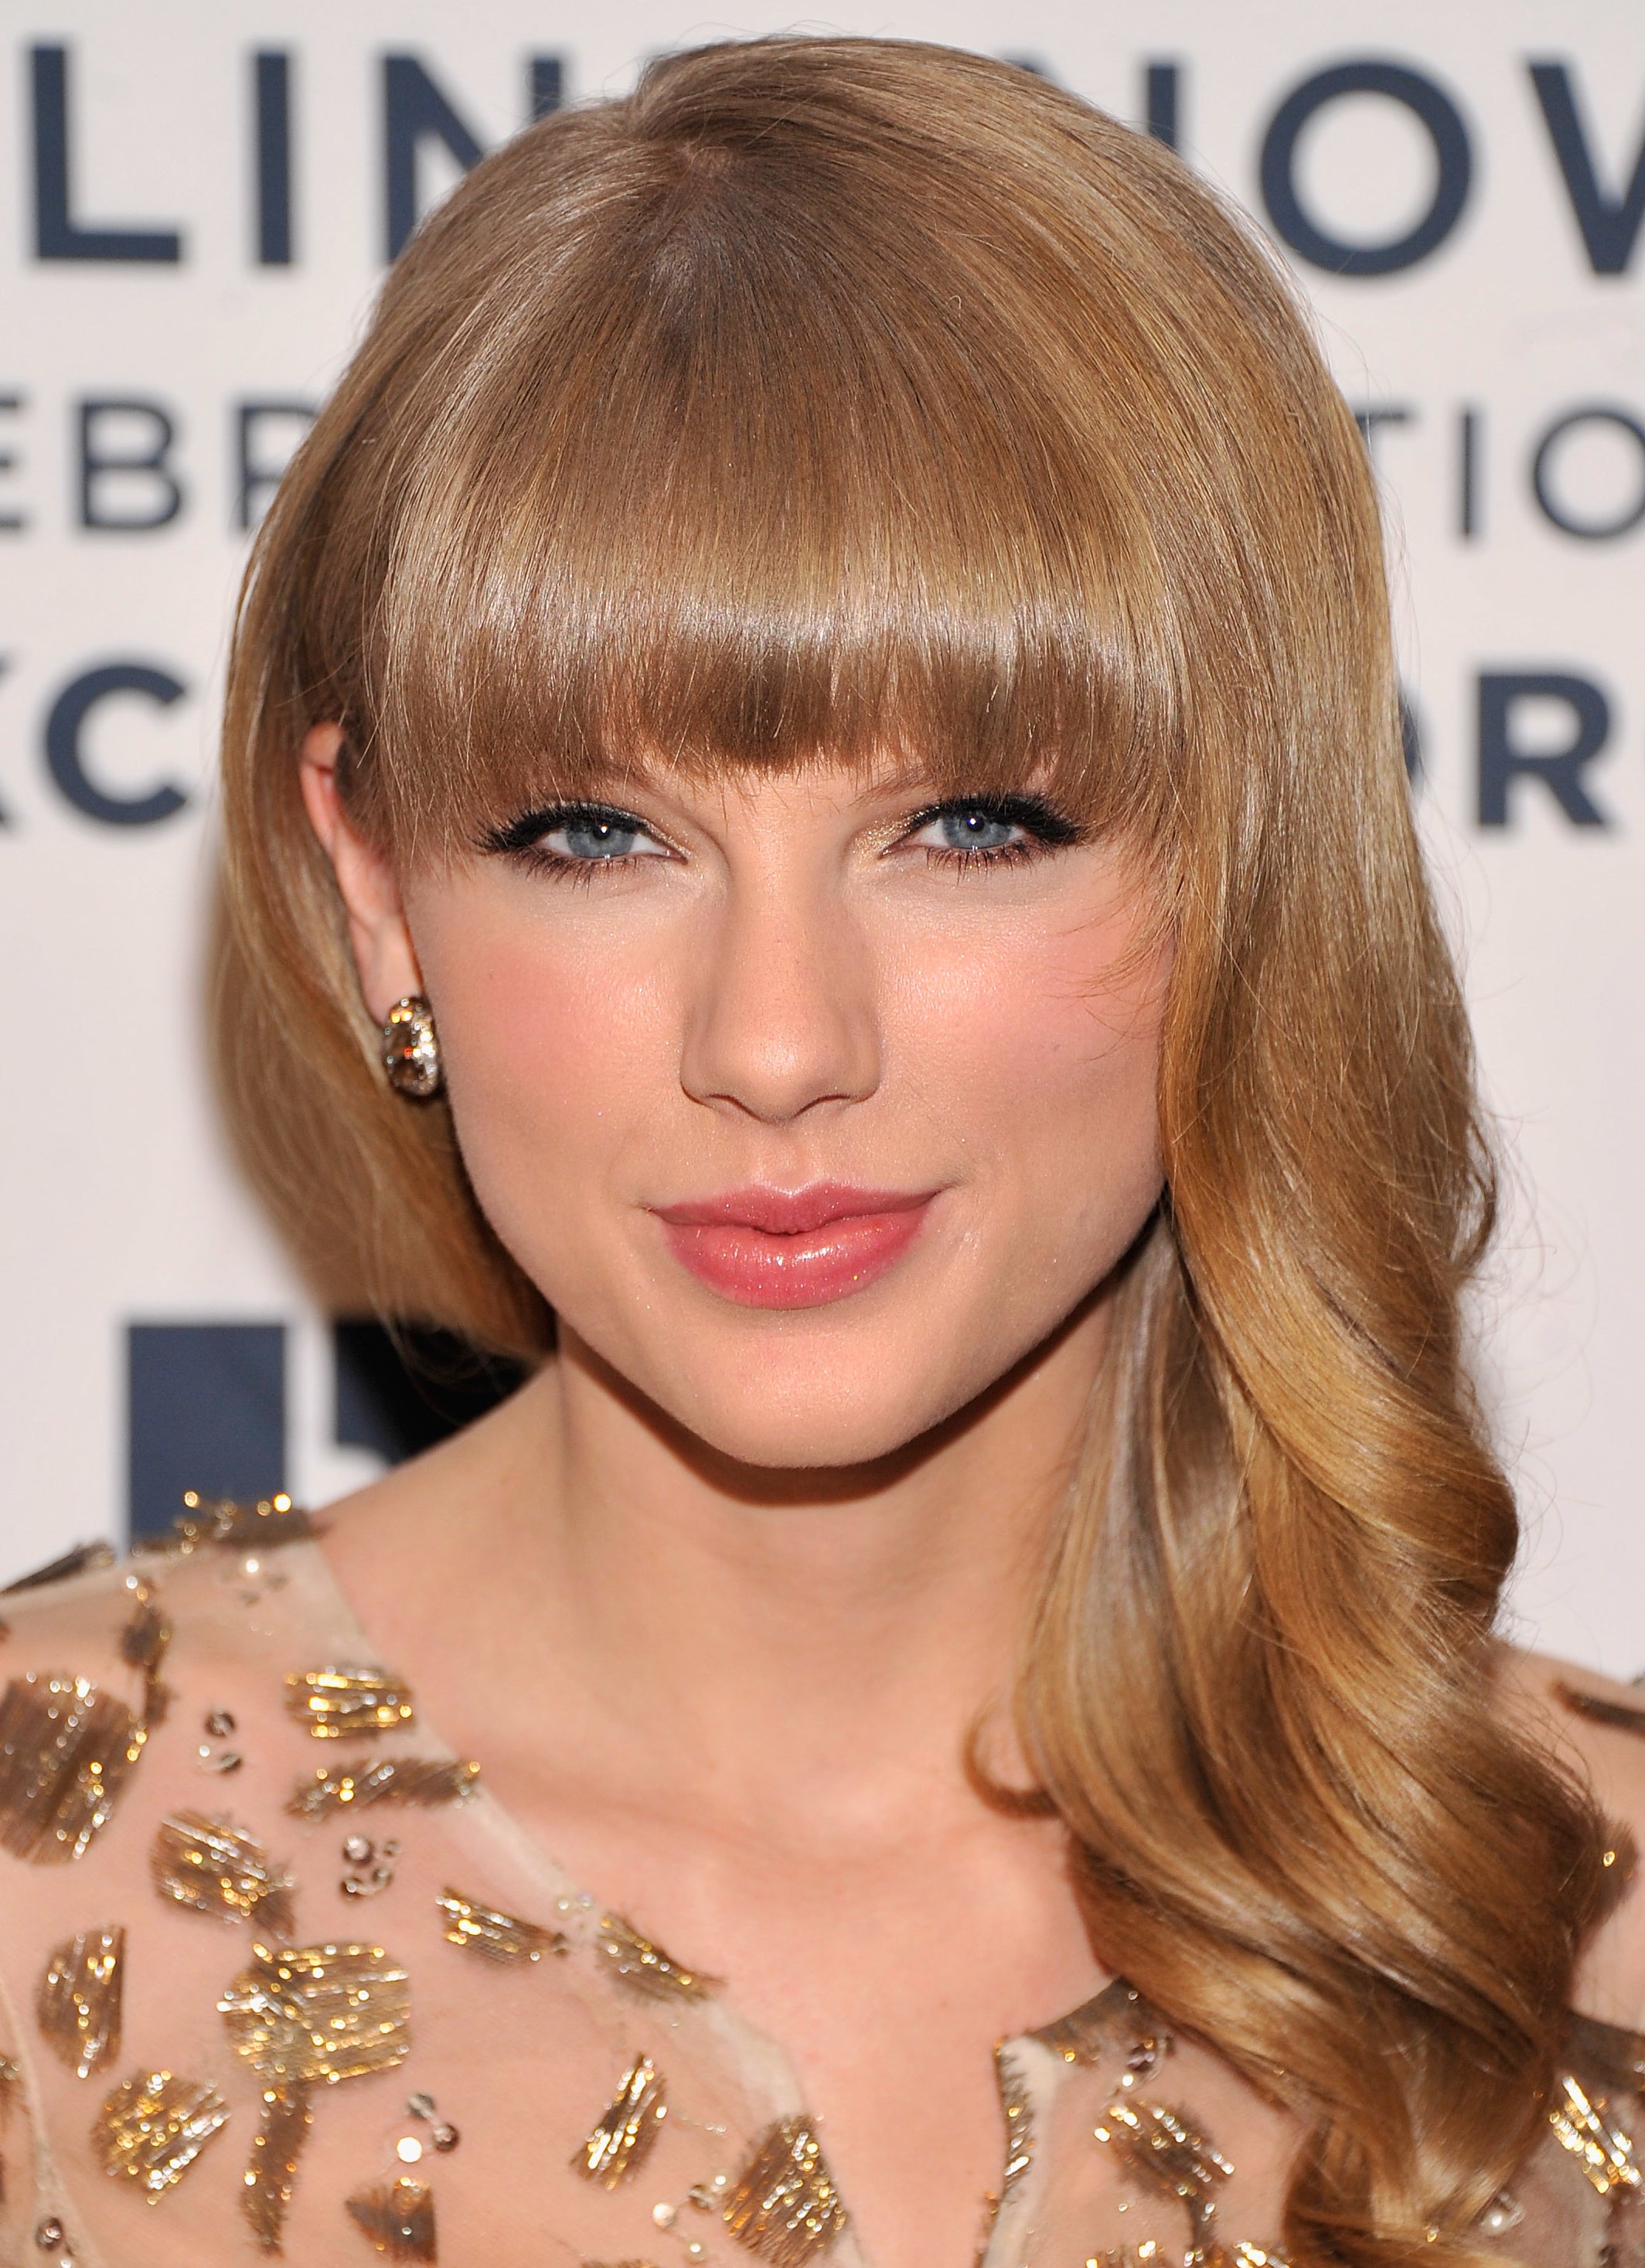 Close-up of Taylor at a media event